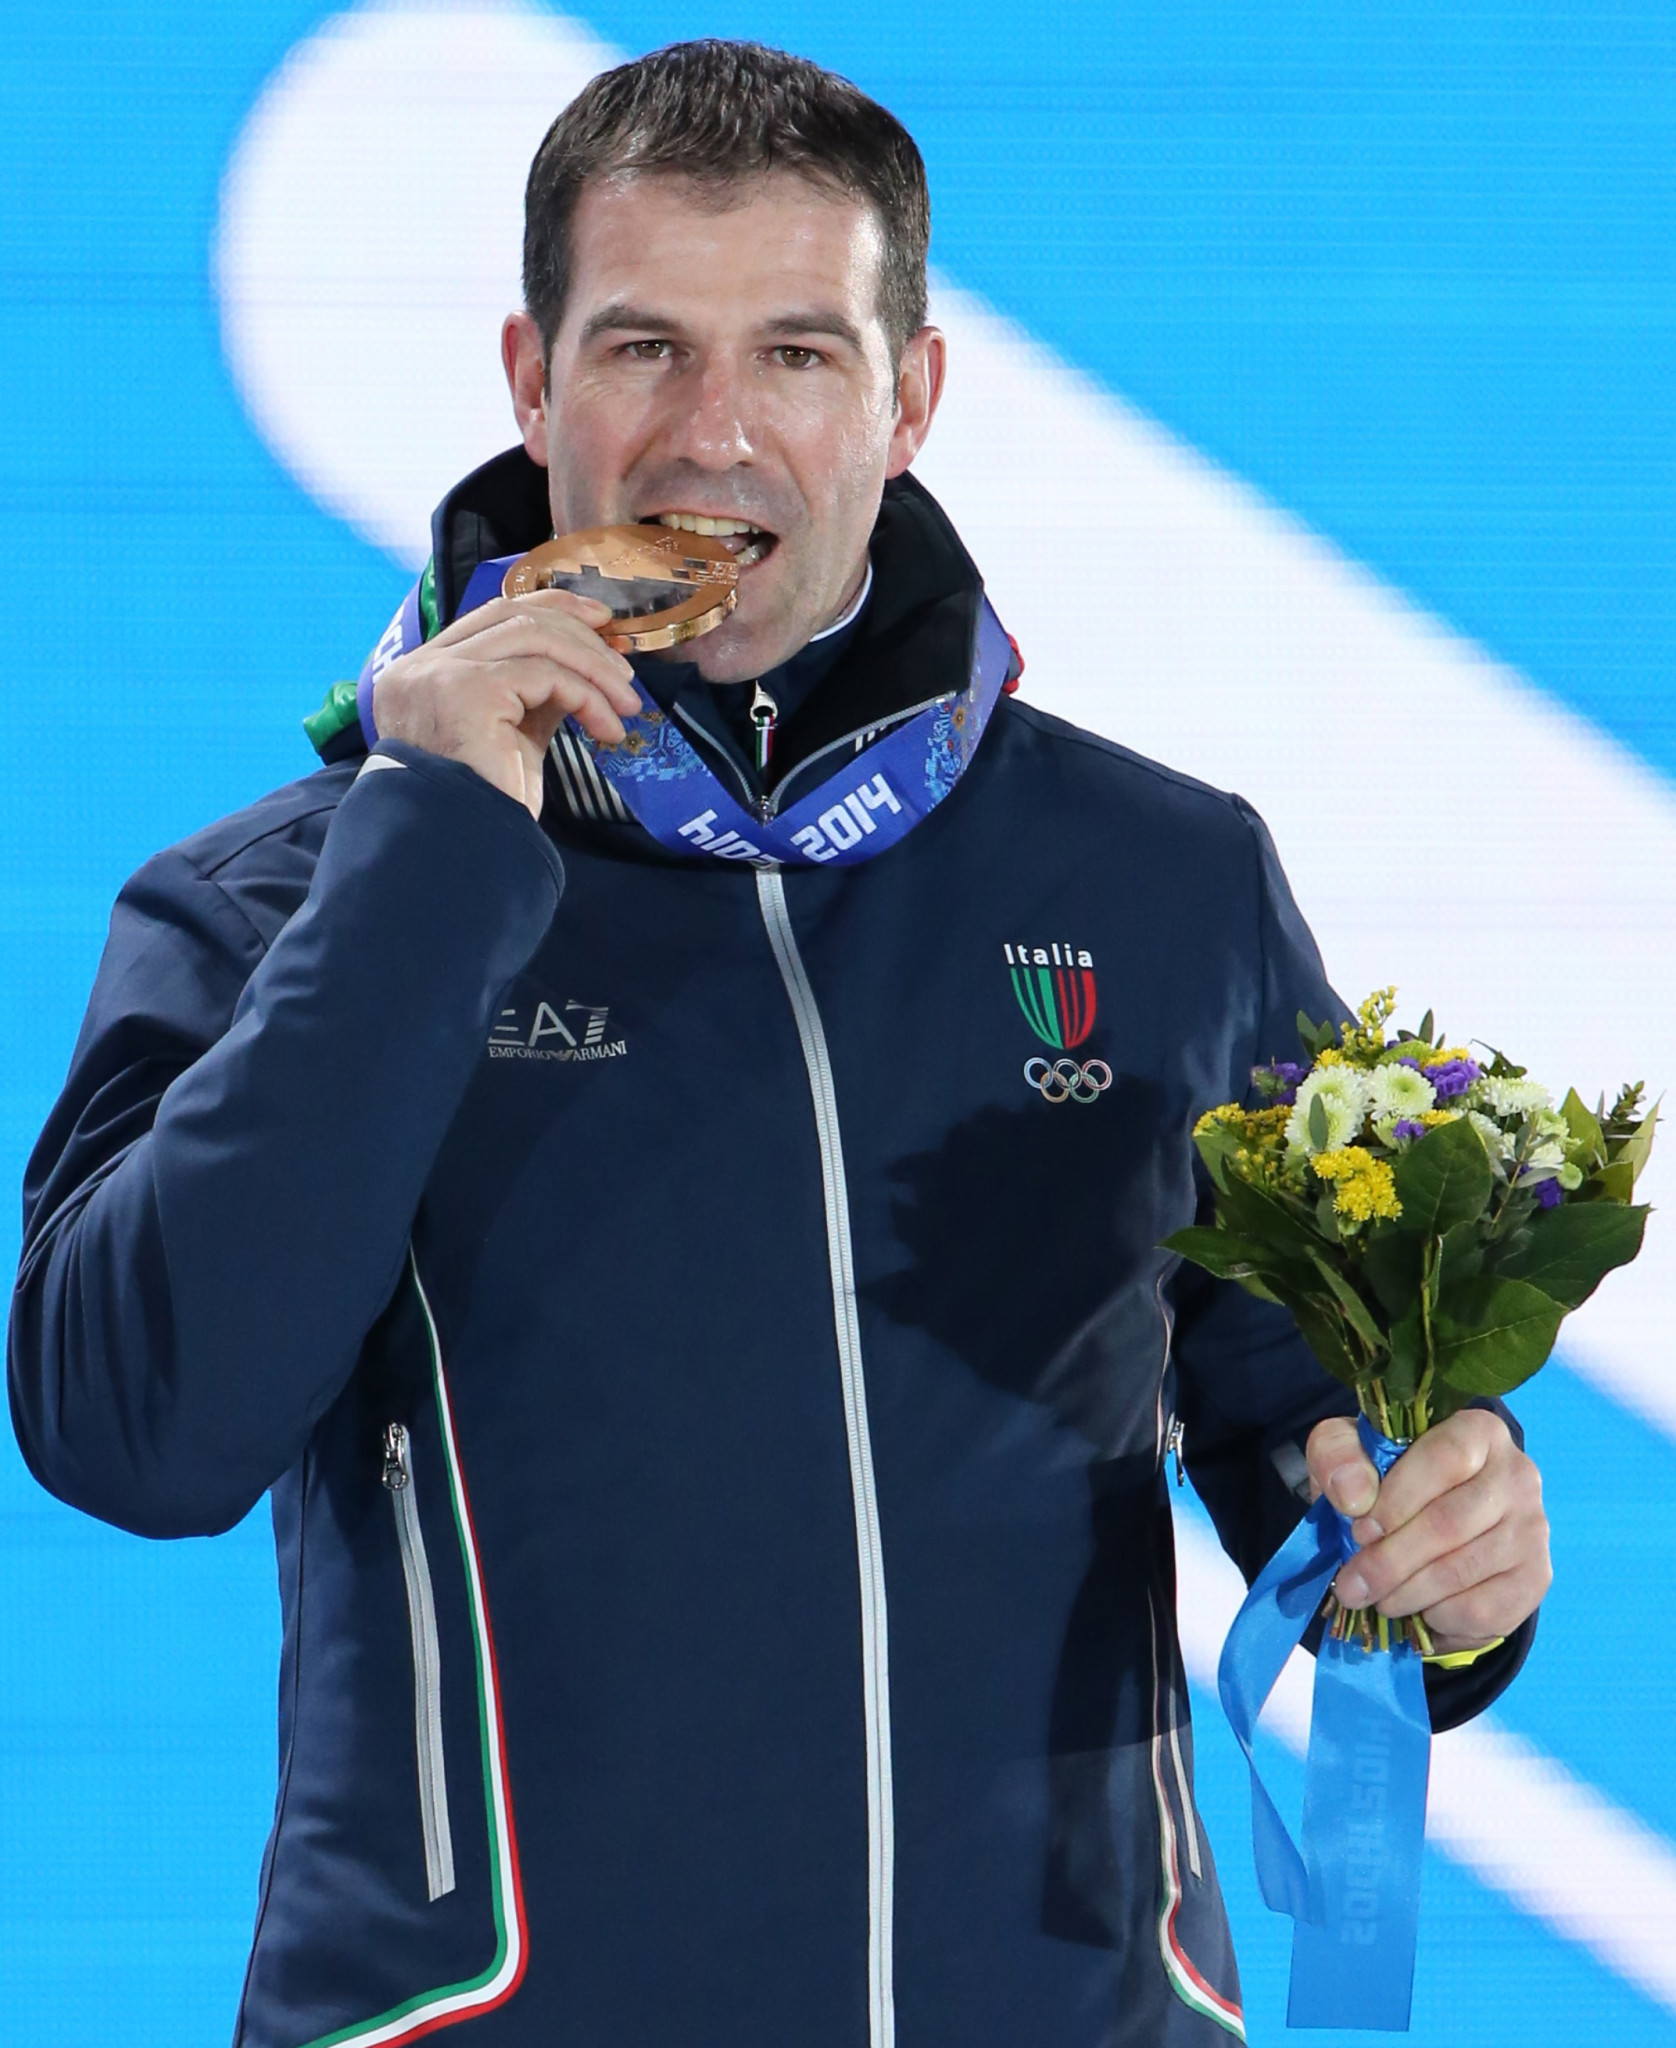 Italian legend Armin Zöggeler has been nominated for the role of vice president for technical affairs at the International Luge Federation ©FIL 